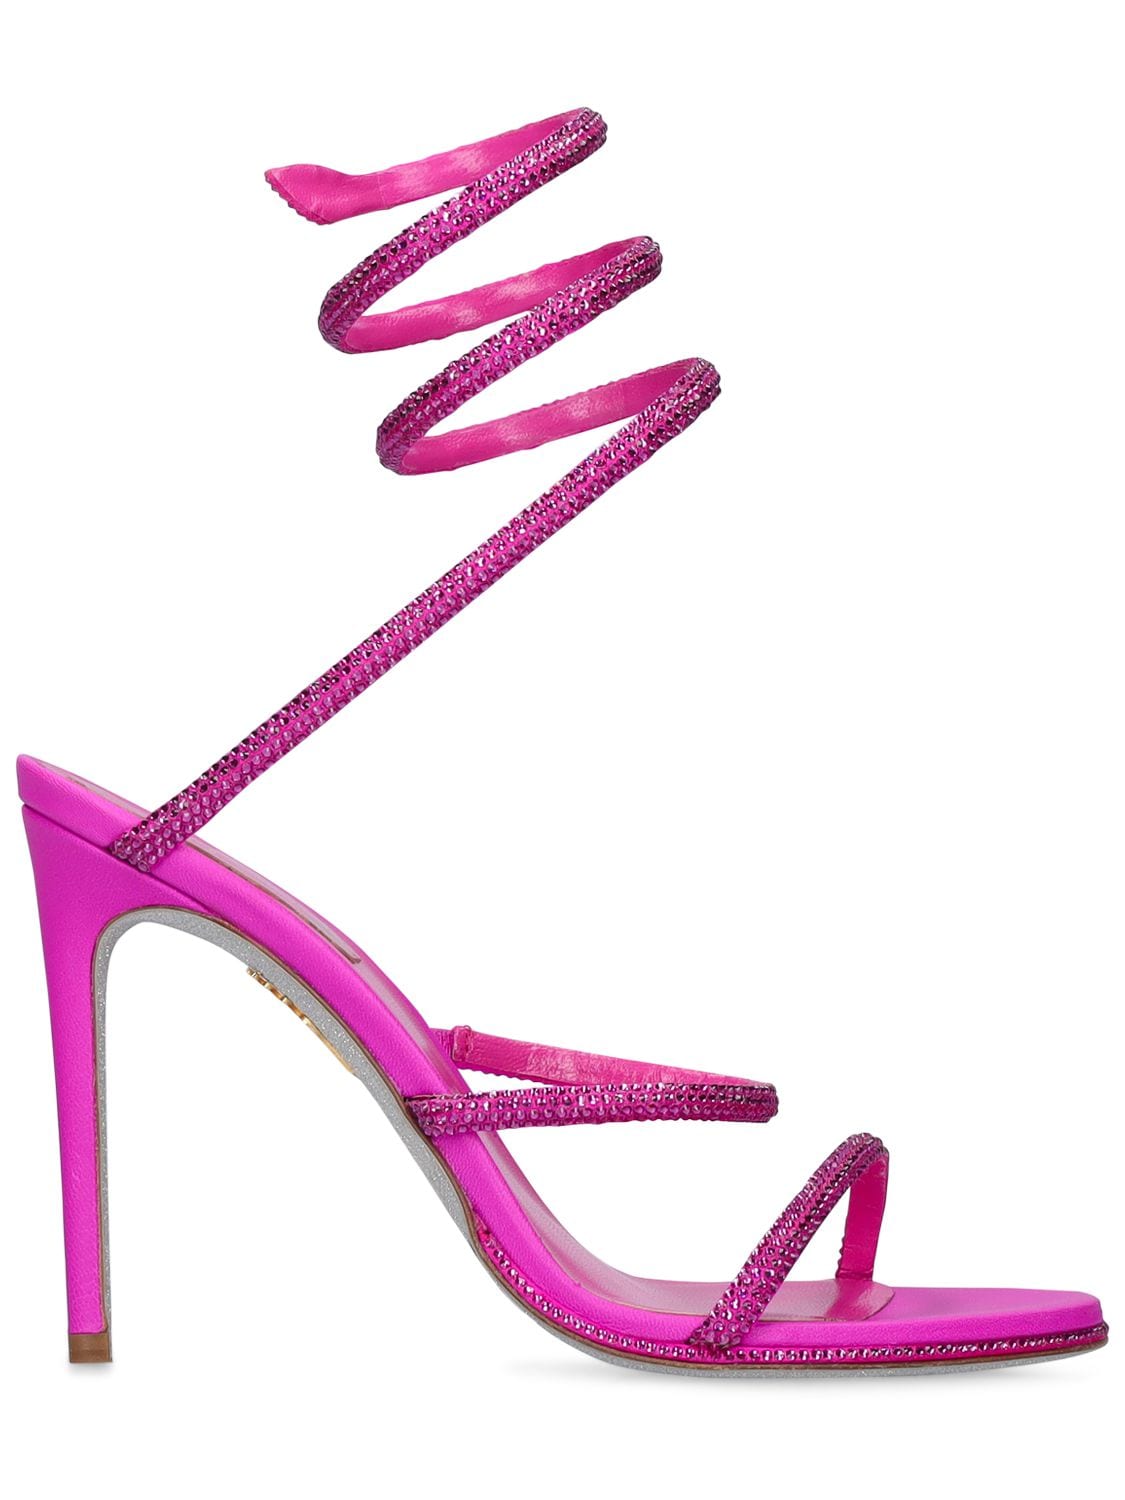 René Caovilla 105mm Embellished Leather Sandals In Fuchsia